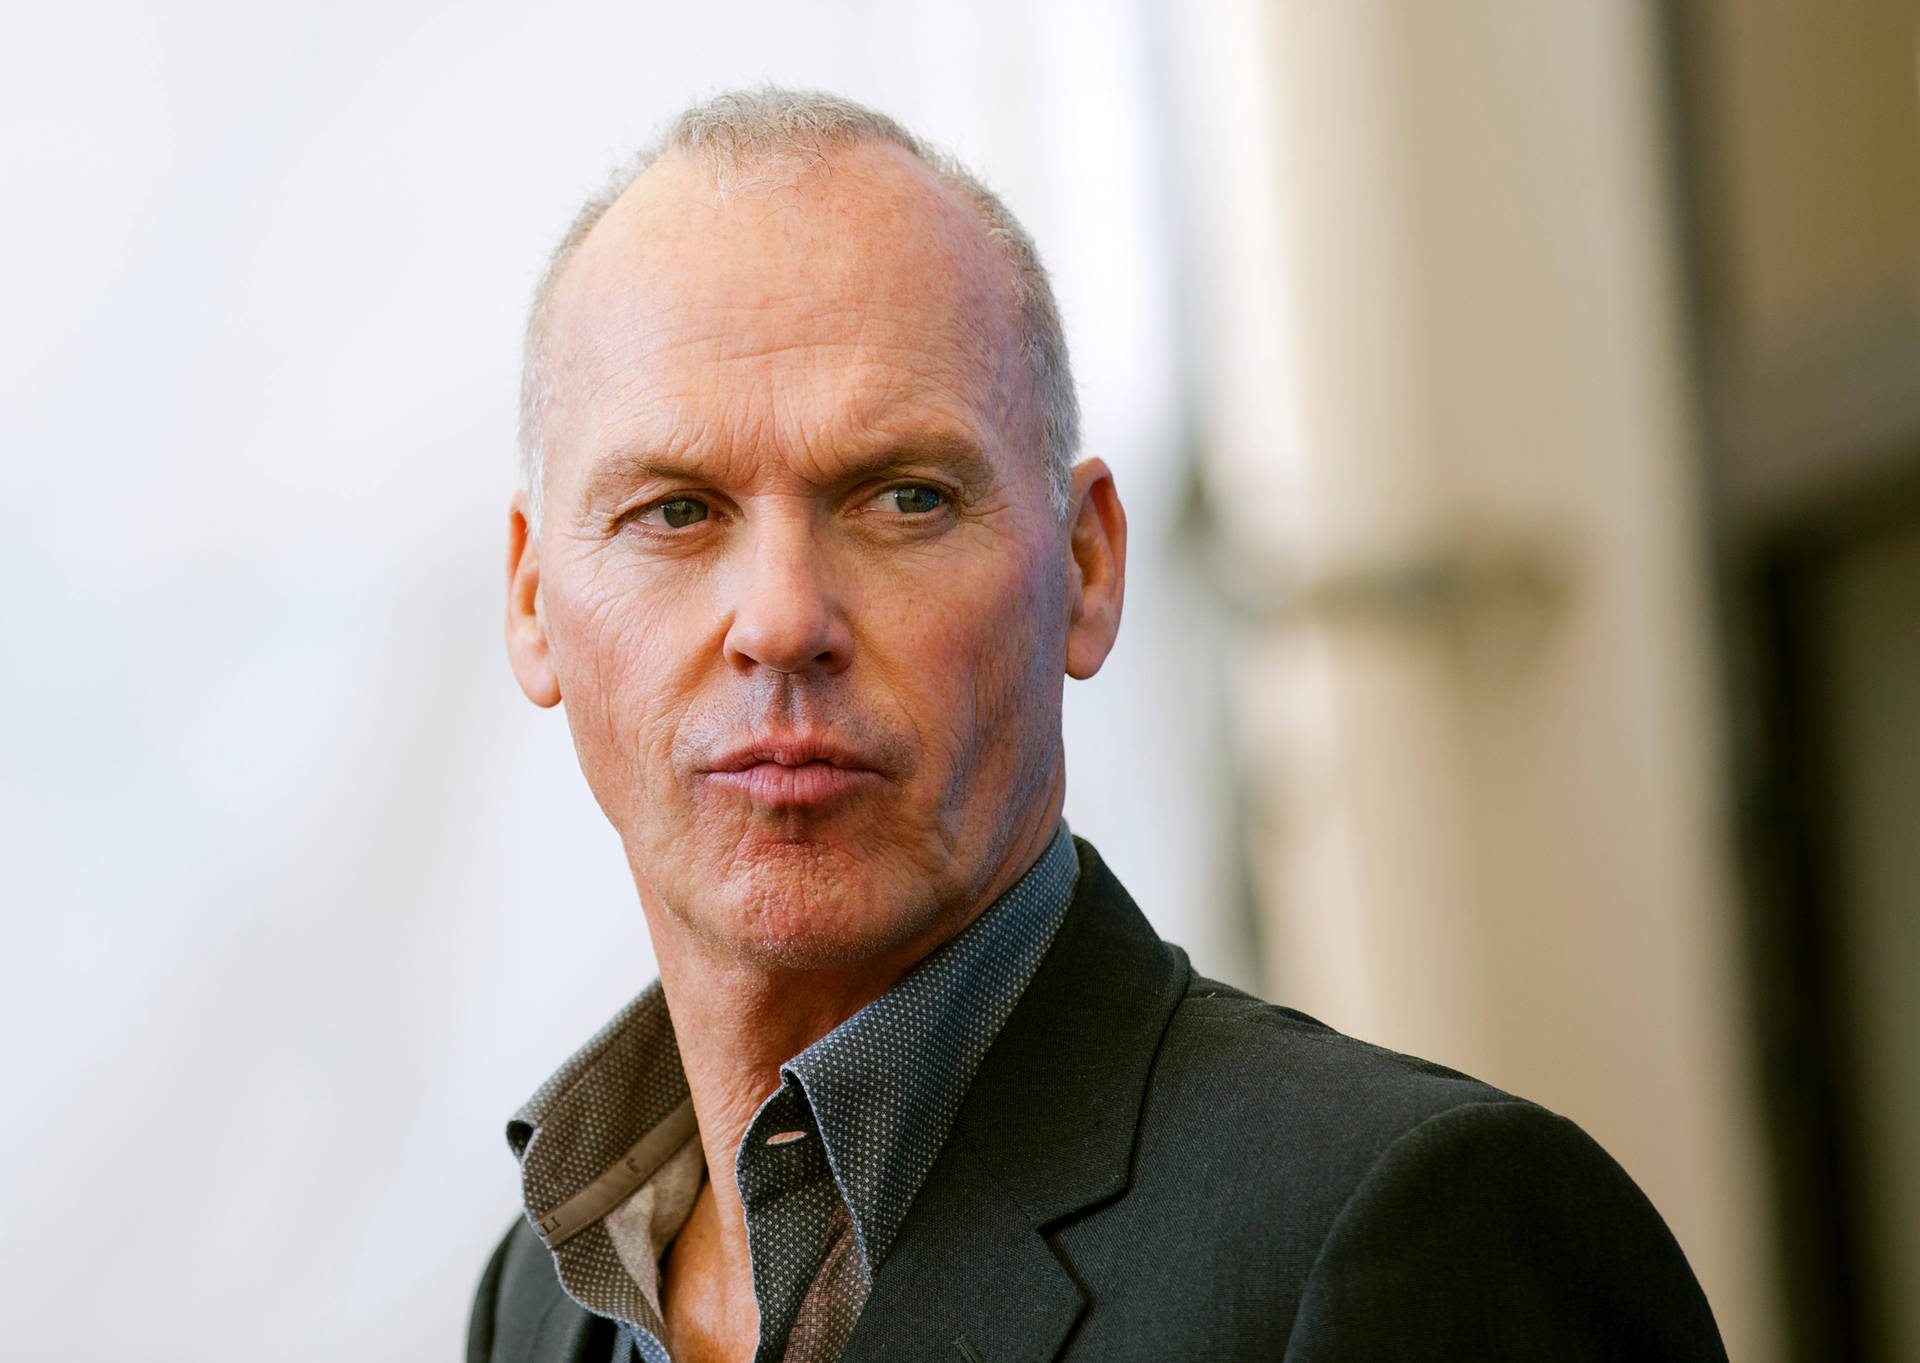 Michaelkeaton, Gammal Amerikansk Kändis. (note: This Doesn't Specifically Refer To Computer Or Mobile Wallpaper, But Provides The Translation Requested.) Wallpaper